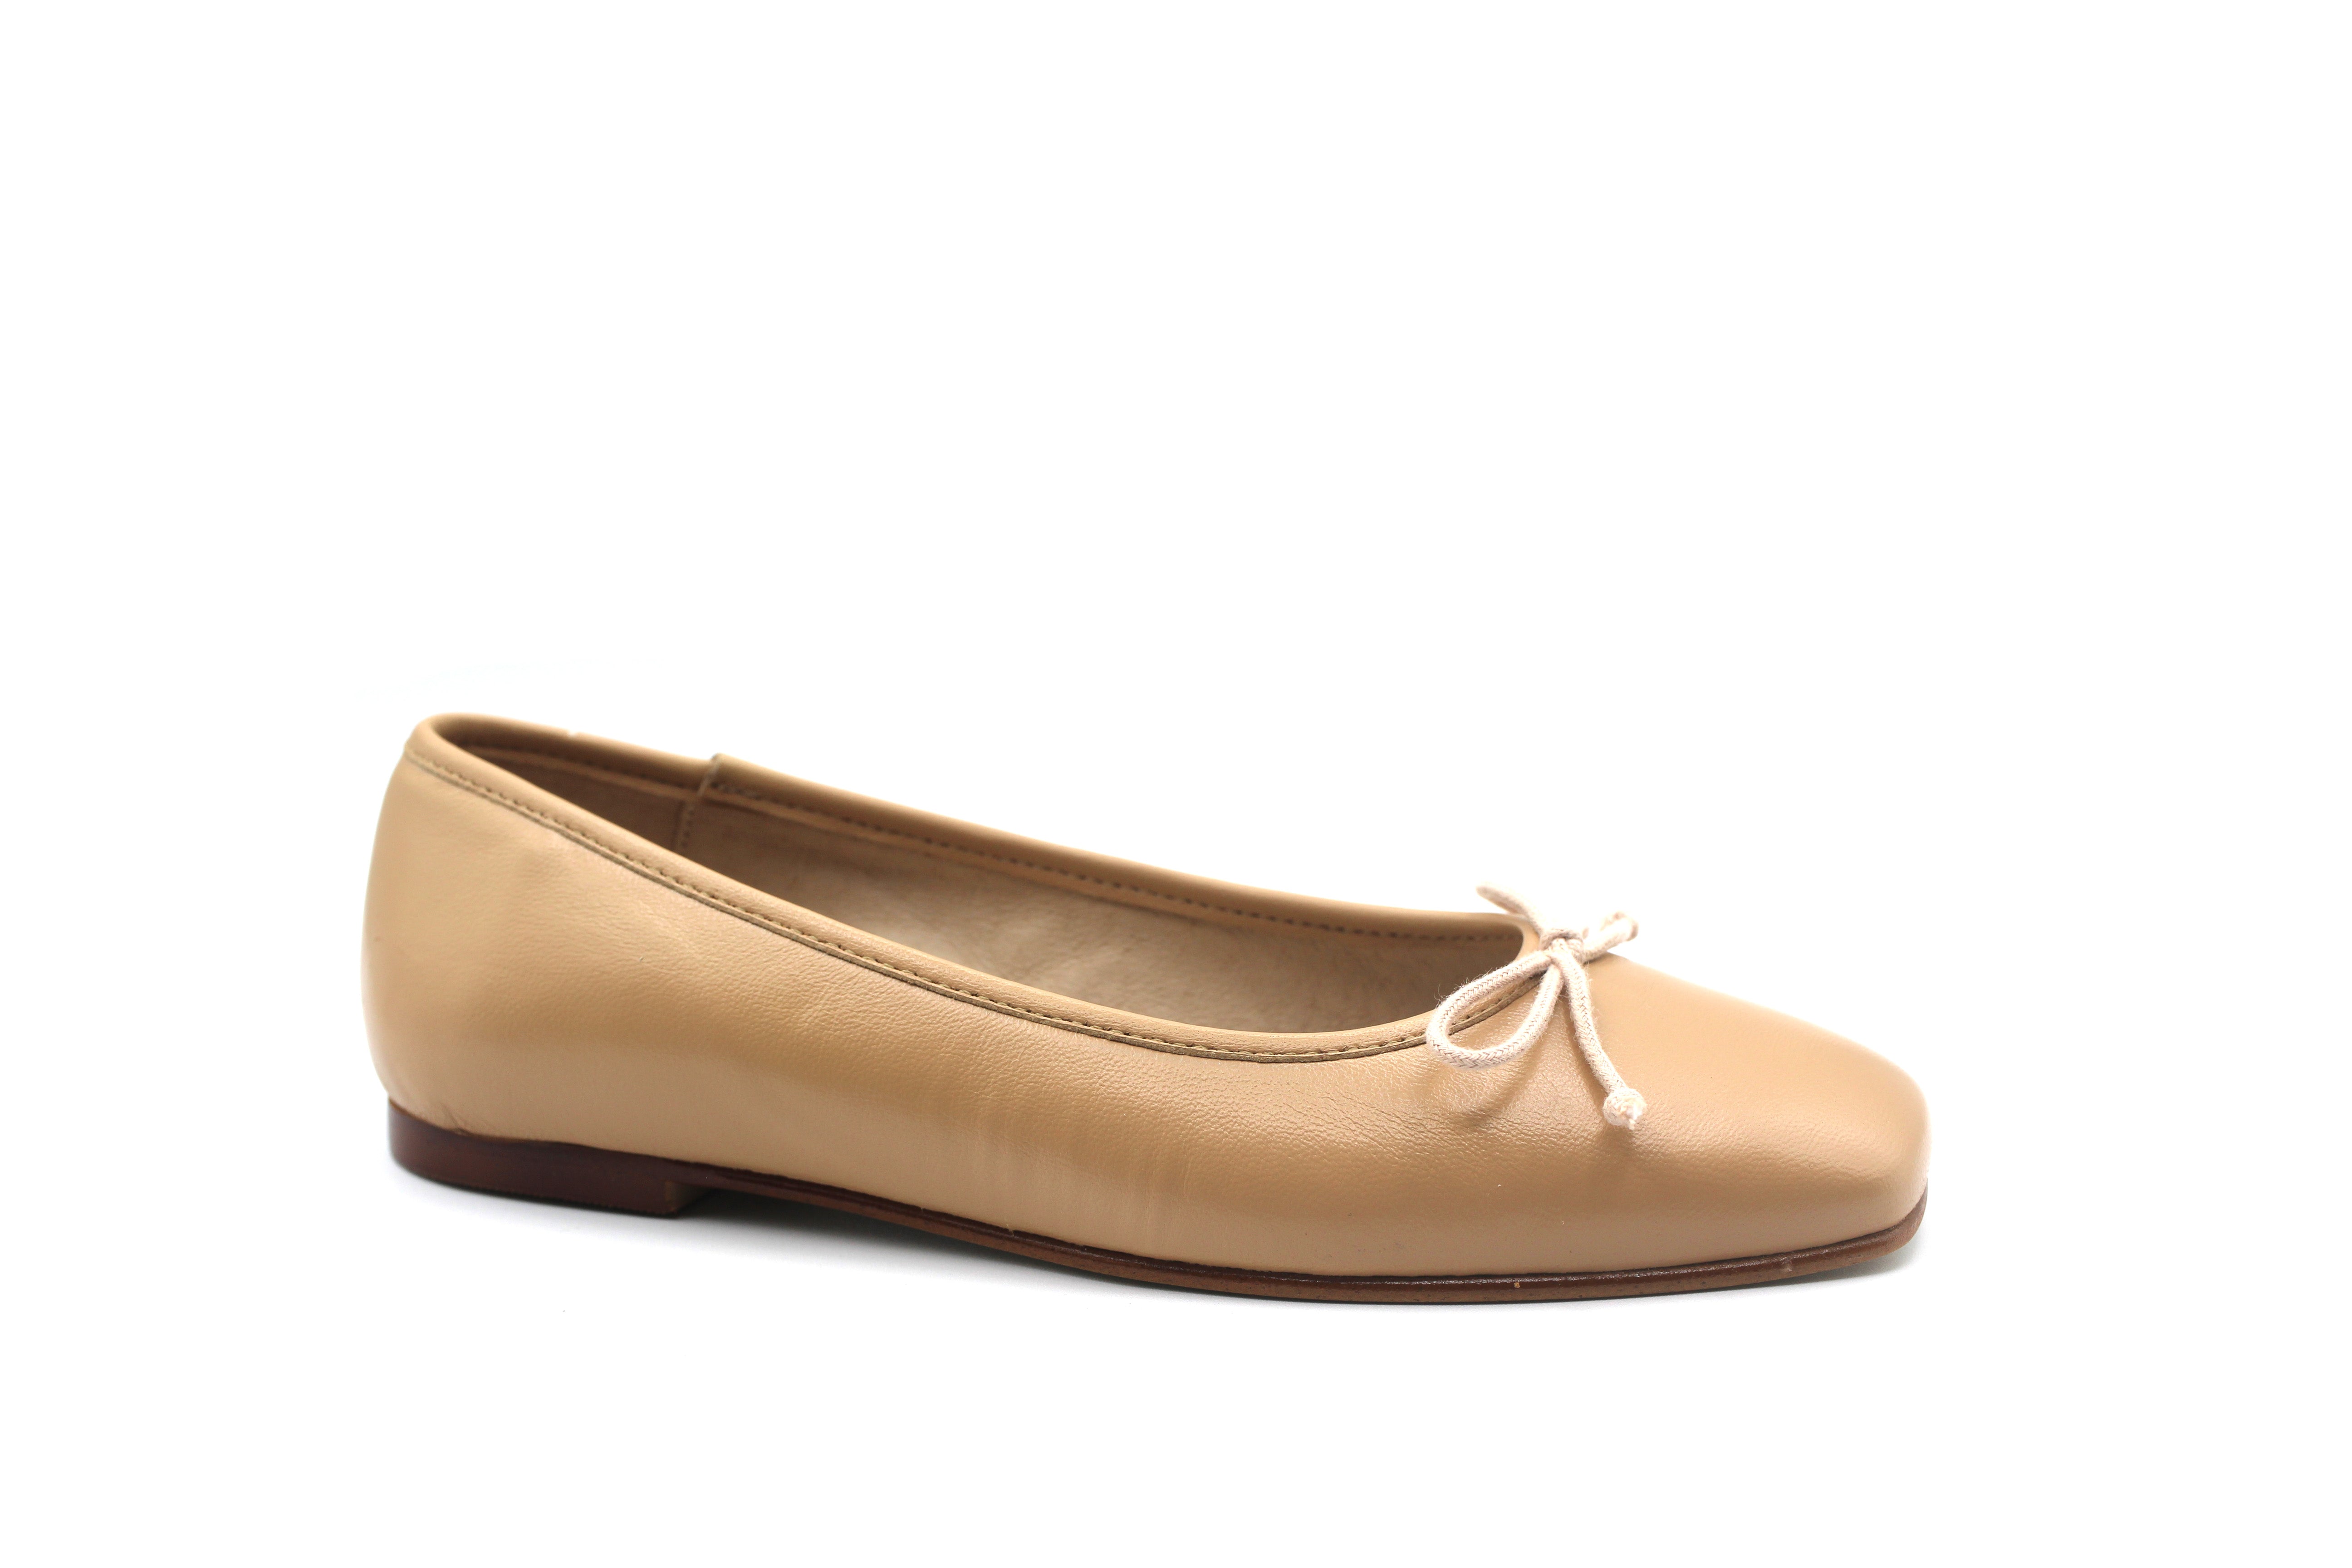 Valencia Taupe Square Ballet Flat